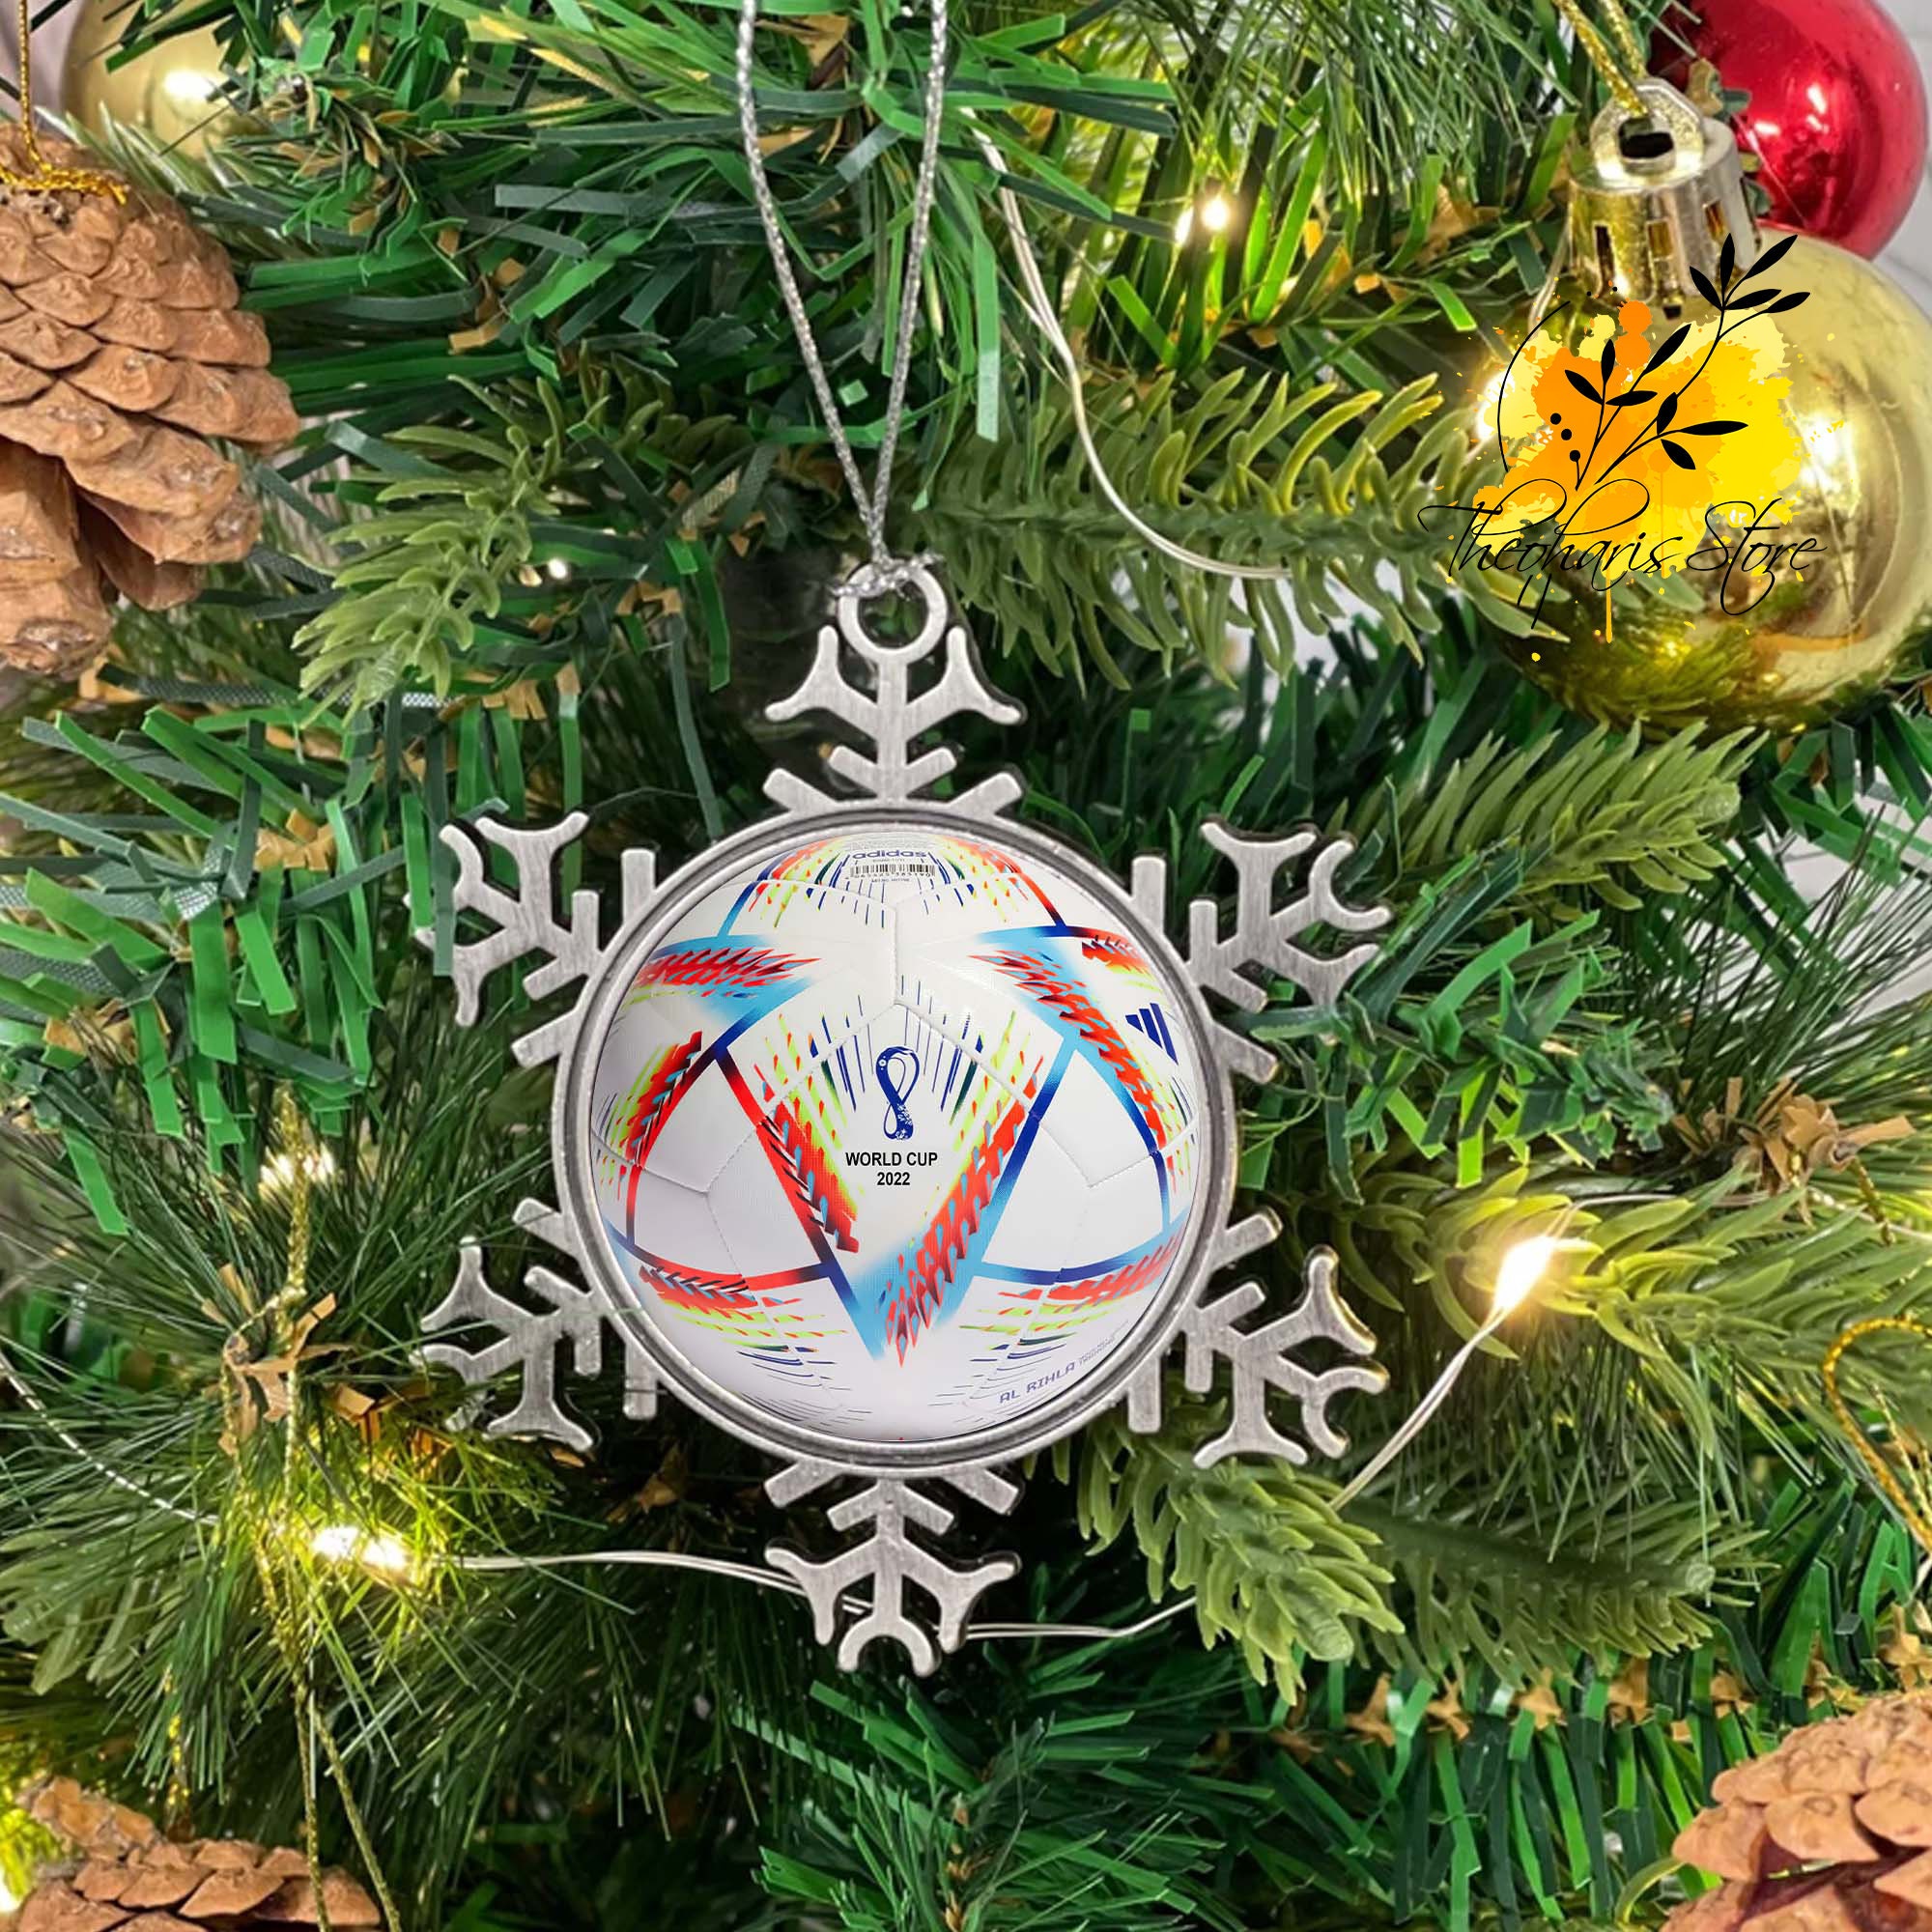 World Cup 2022 Ornament, World Cup Ball Ornament, Football Fan Gift